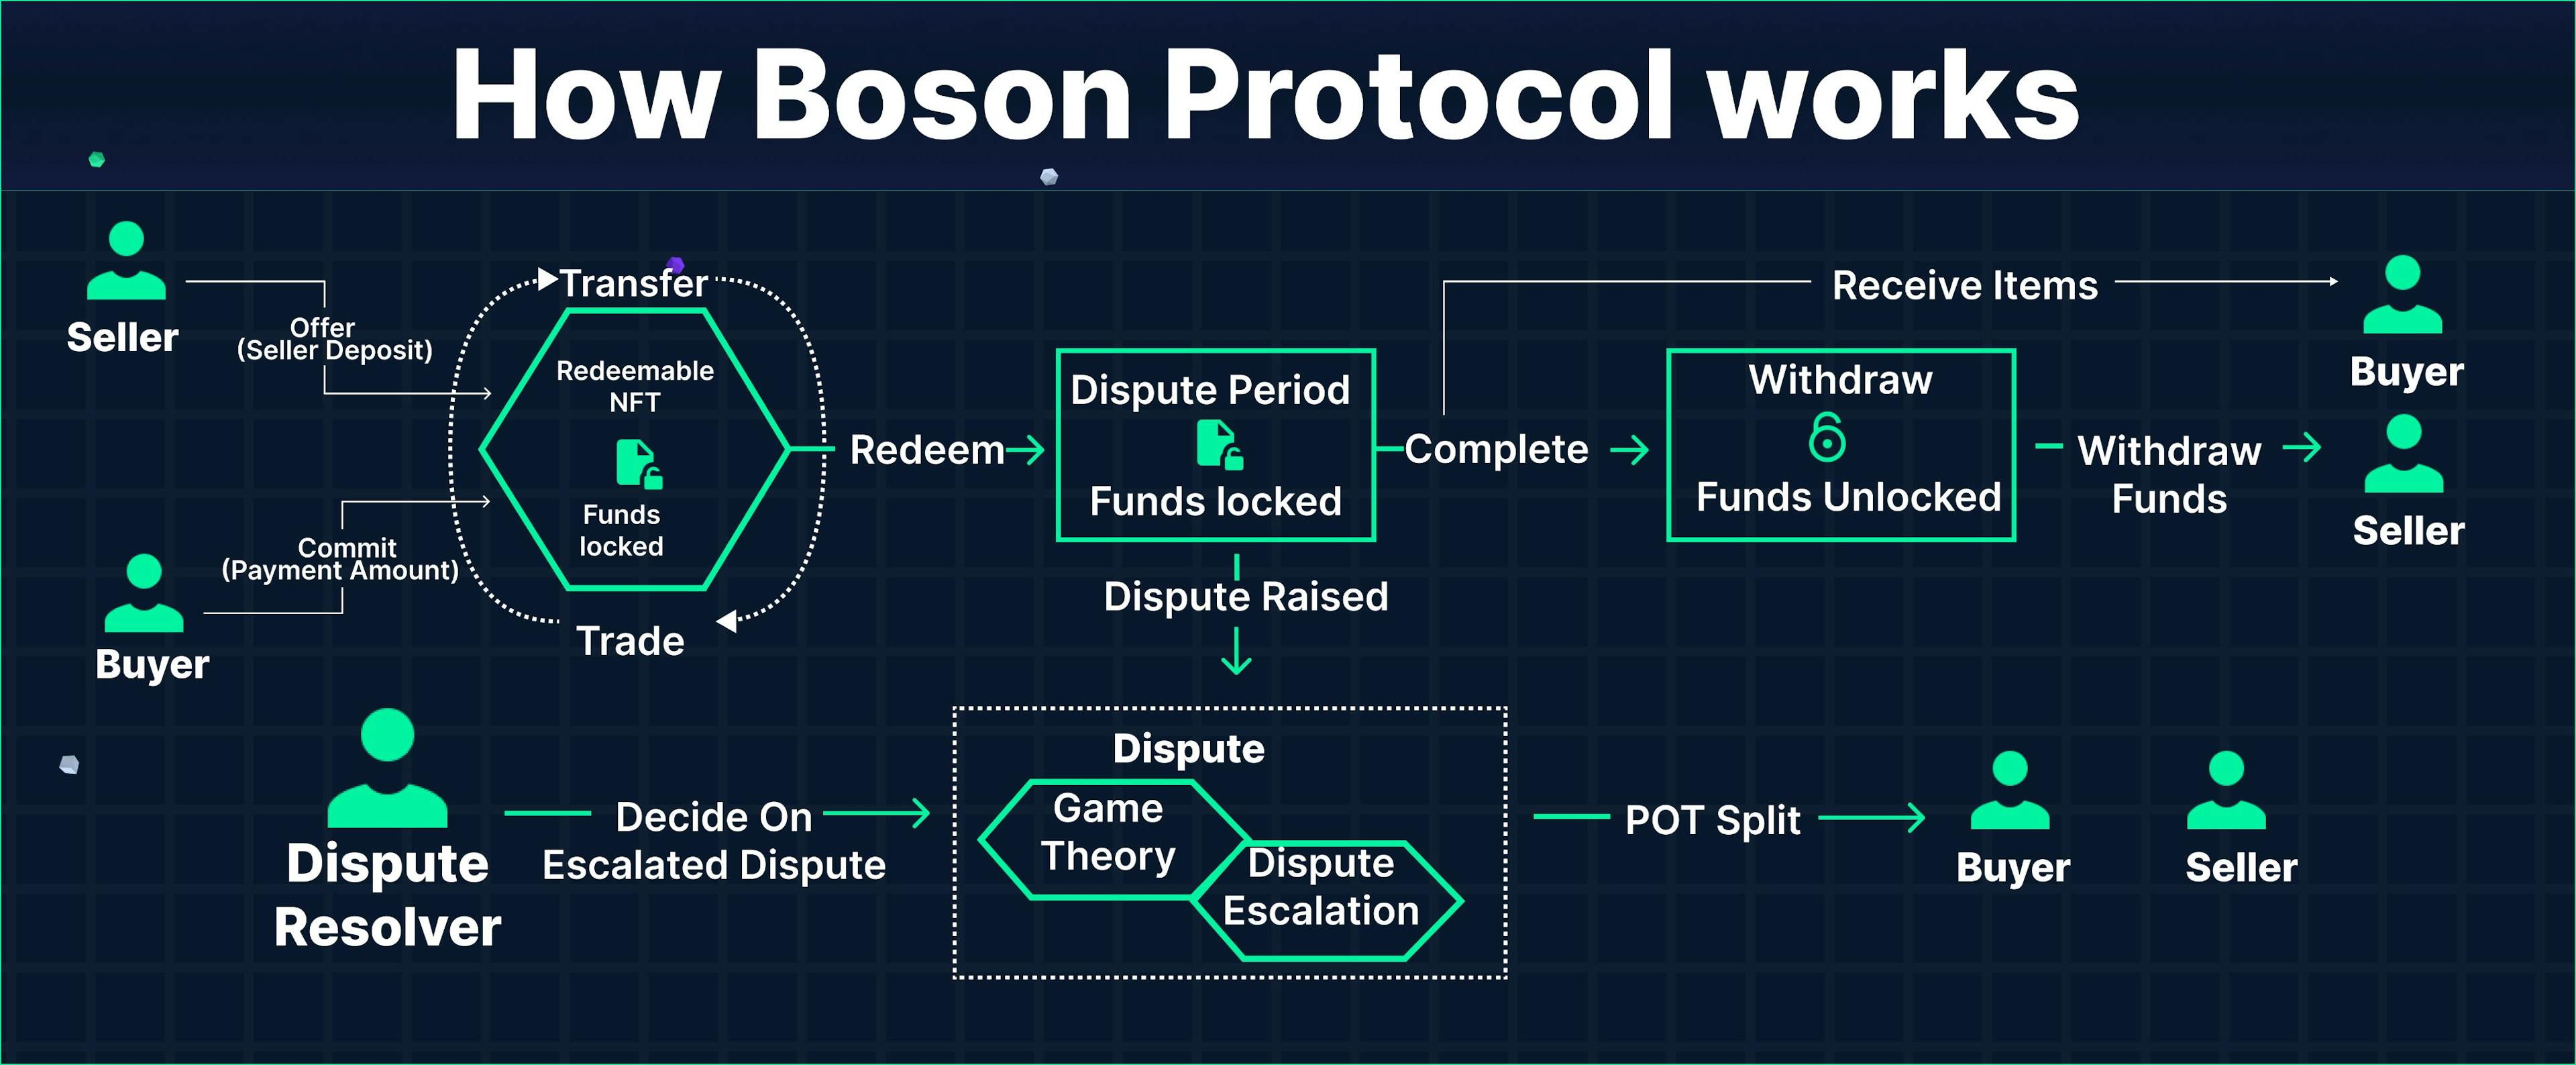 Boson Protocol allows blockchain-based entities to build networks of physical trade. It combines public blockchain primitives and mechanisms such as NFTs, smart contract escrow, and arbitration to build a trustless flow for exchange. Source: Graphic (https://twitter.com/SatoshiScribes/status/1752012737821962616?s=20) by SatoshiScribes published on Twitter, used under a fair use rationale.